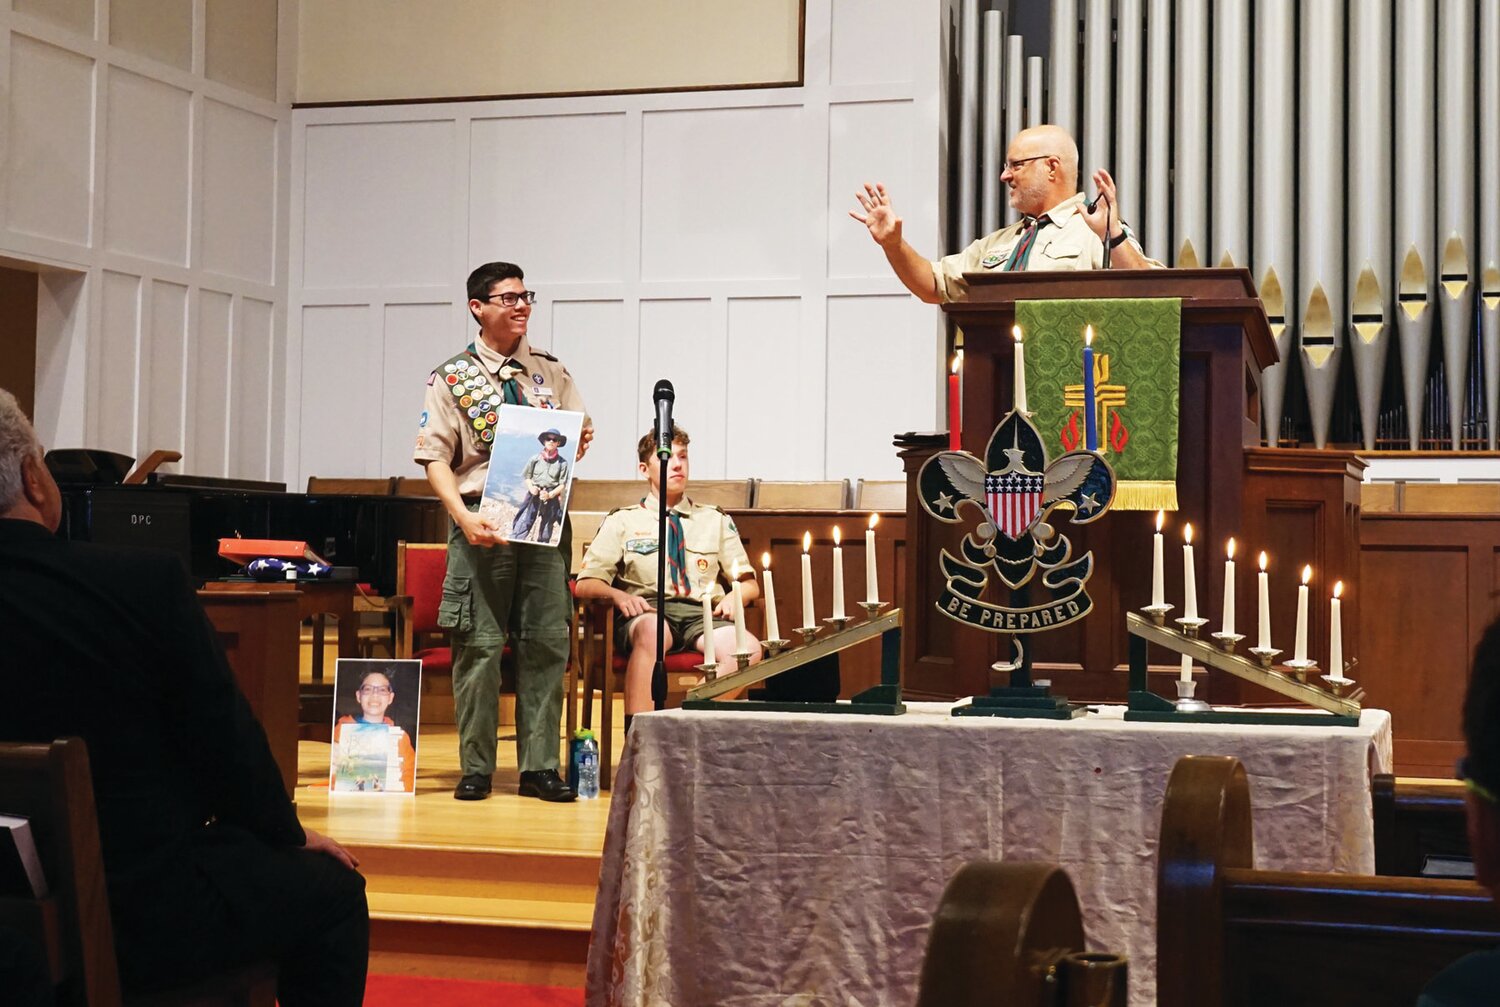 Eric Simon, left, receives the Eagle Scout Award in a ceremony on June 17. Simon is the 50th Scout from Troop 48 of Doylestown to attain the Eagle rank.